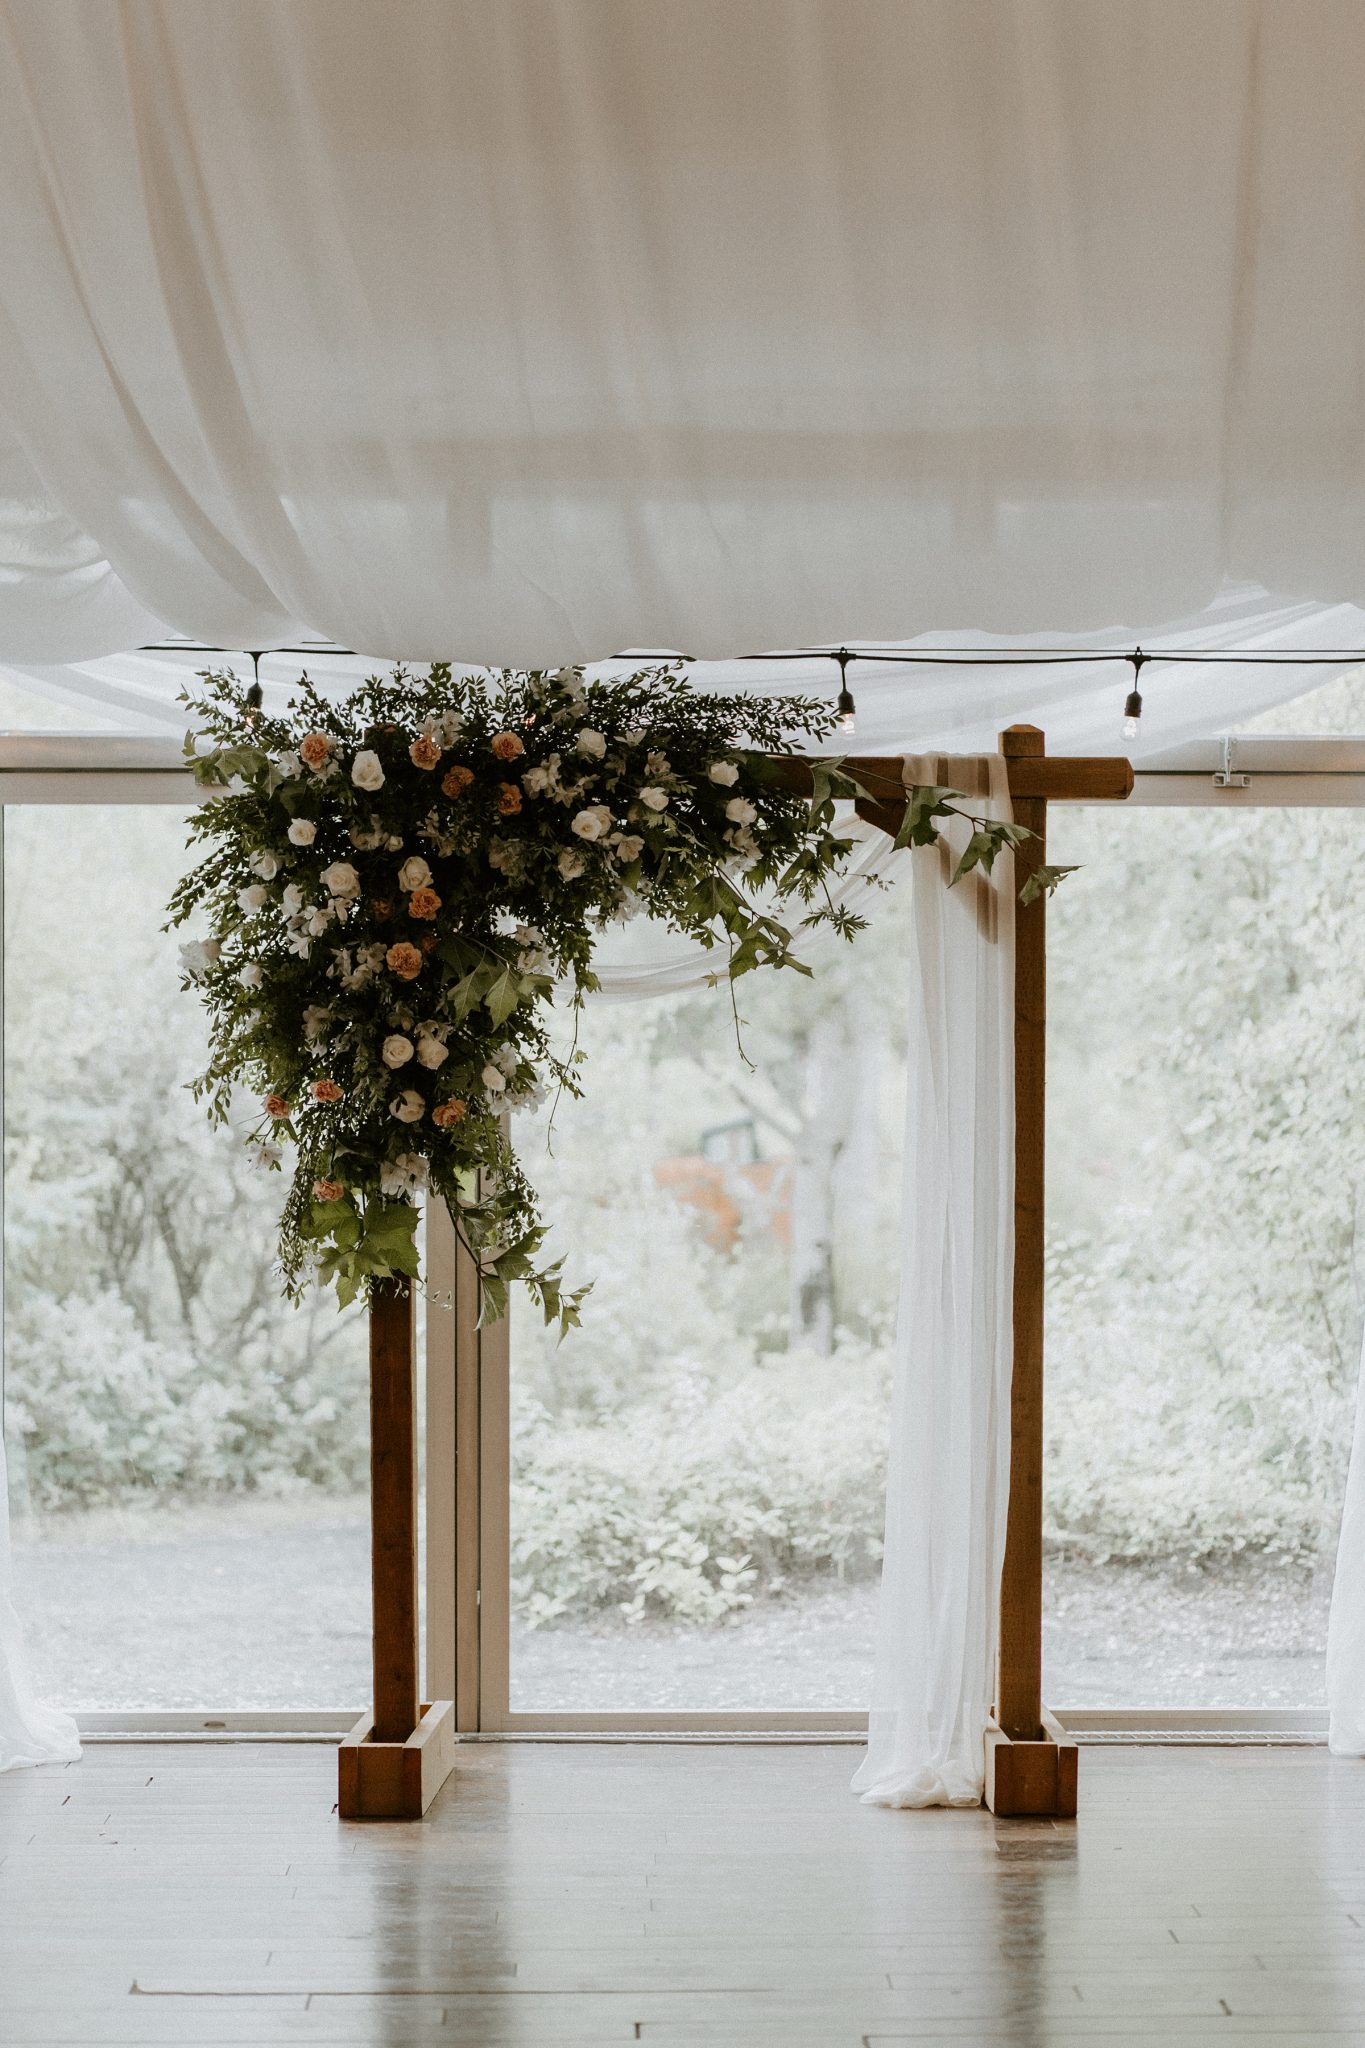 Best of 2020 // The Top 12 Most Popular Wedding Features of This Year - Brontë Bride Blog